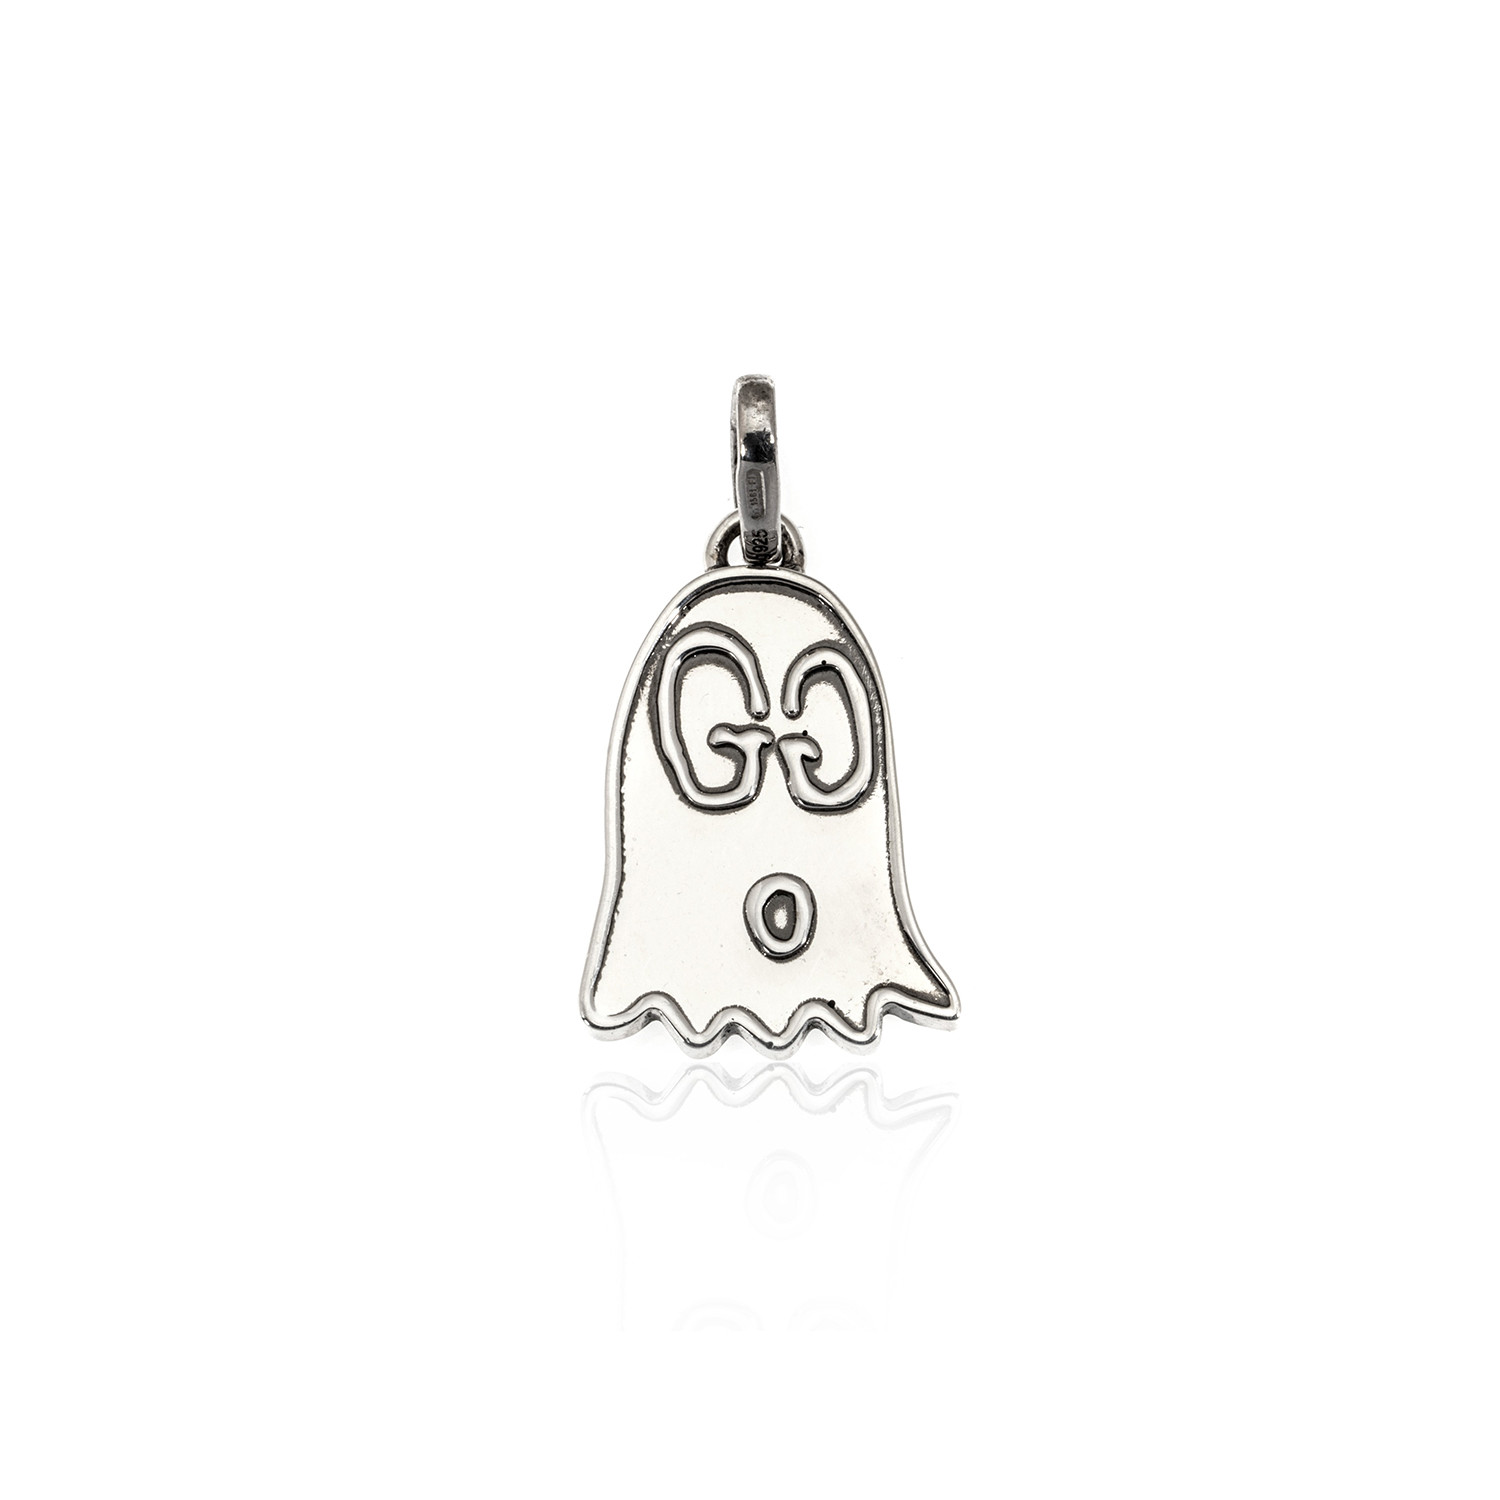 Næste vrede Uovertruffen Gucci Ghost Sterling Silver Charm - Luxury Jewelry - Touch of Modern